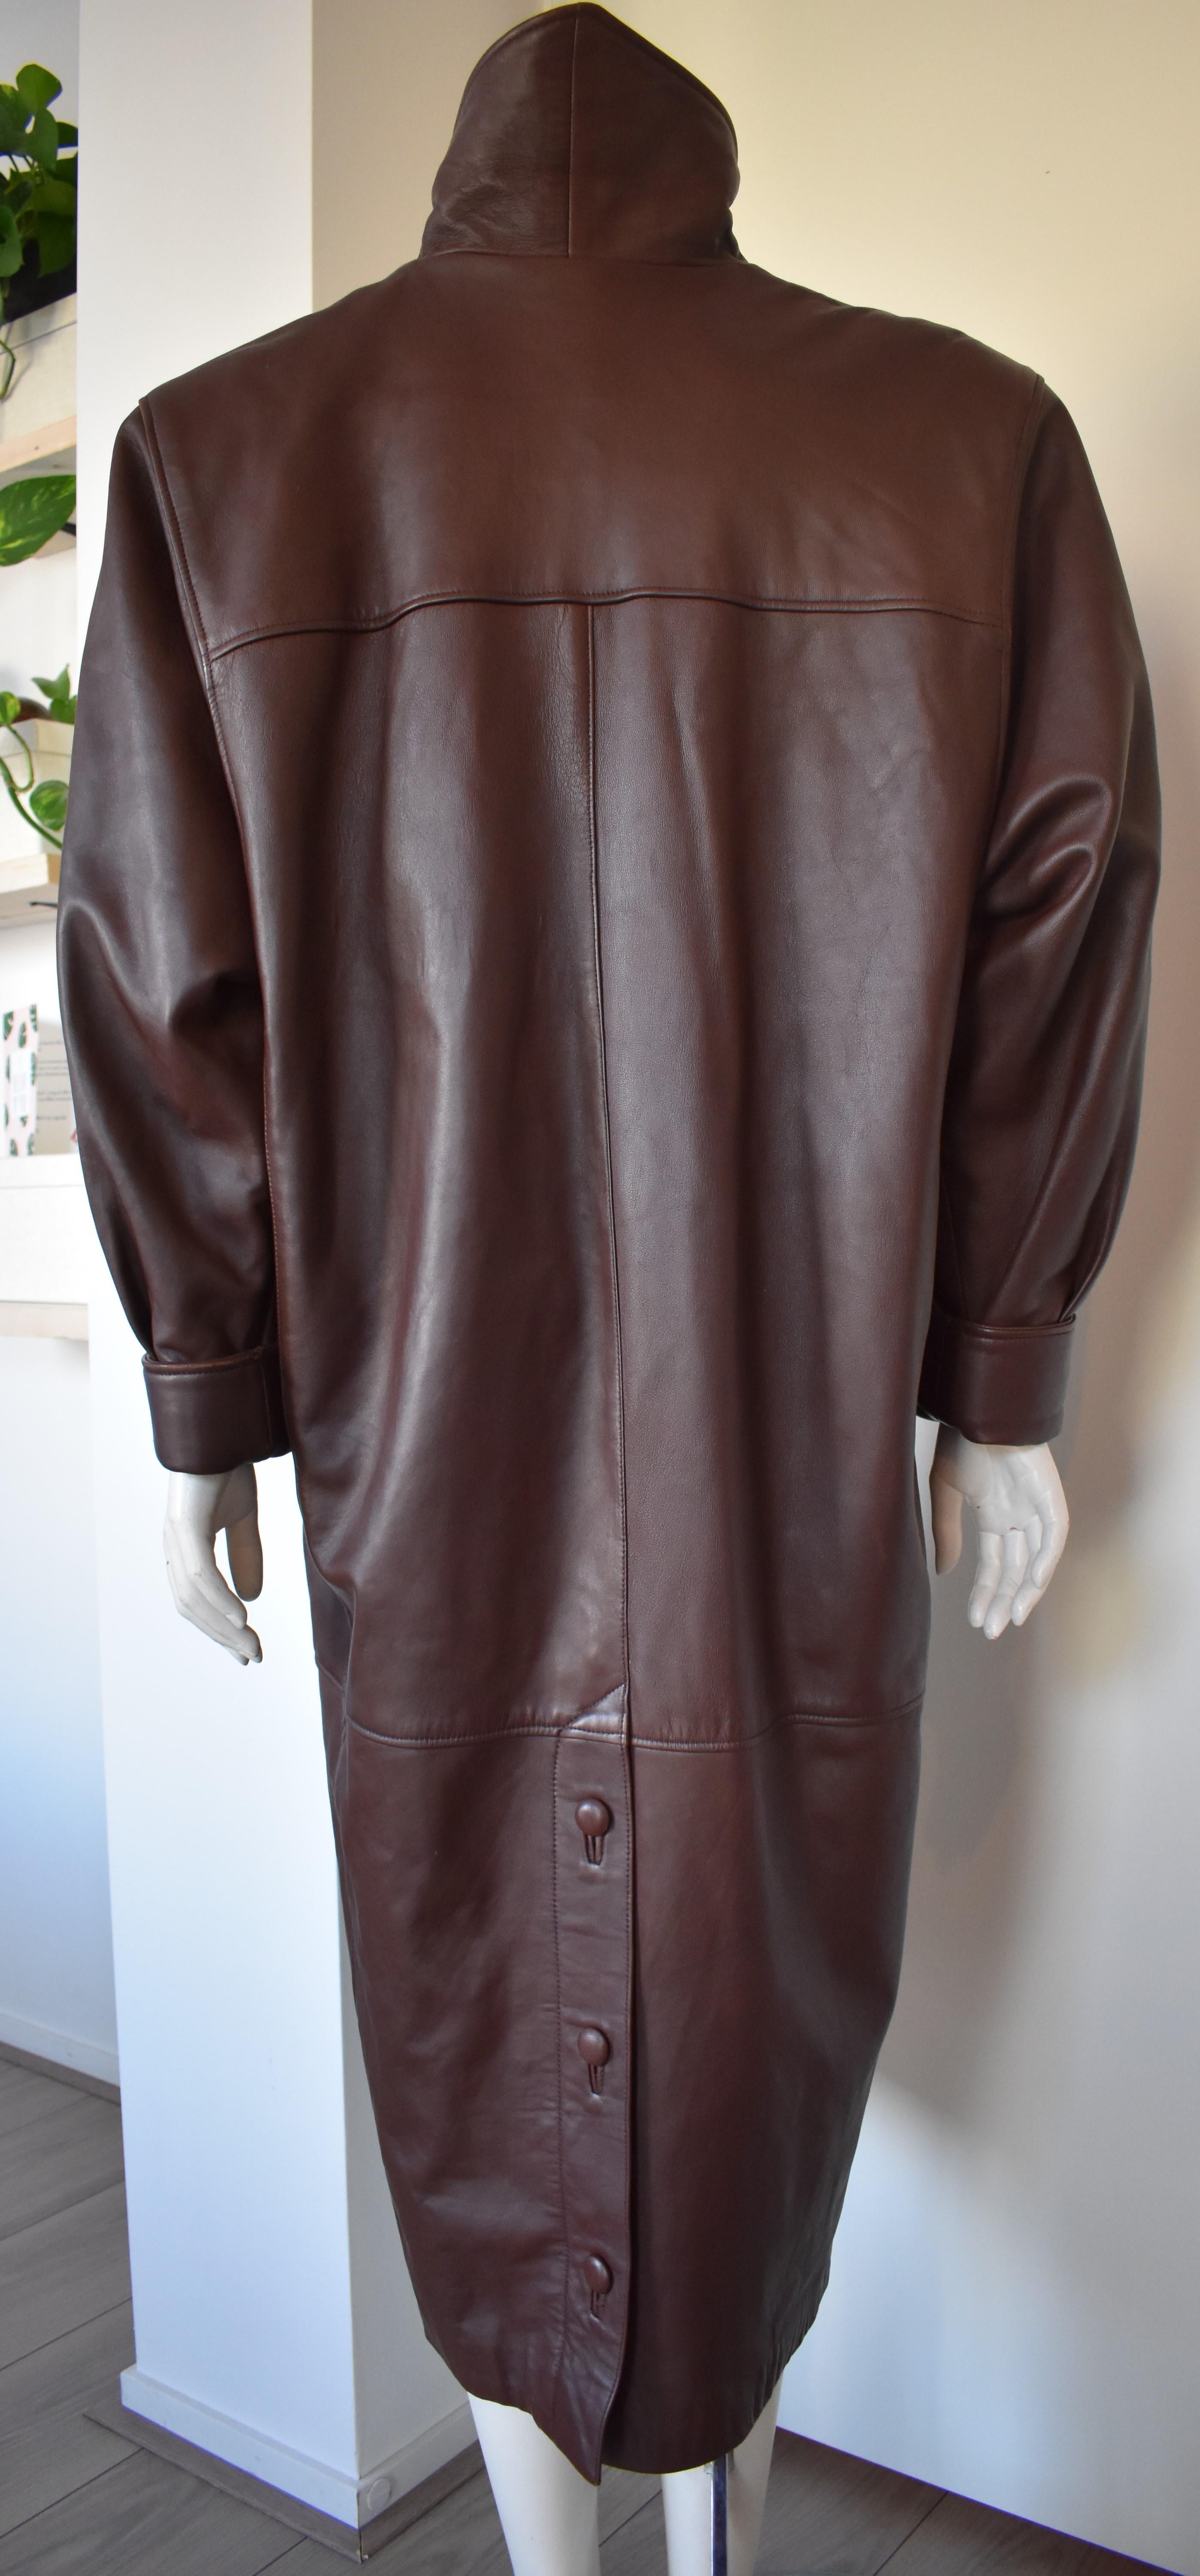 Chocolate Brown Leather Coat by Carven Paris 2